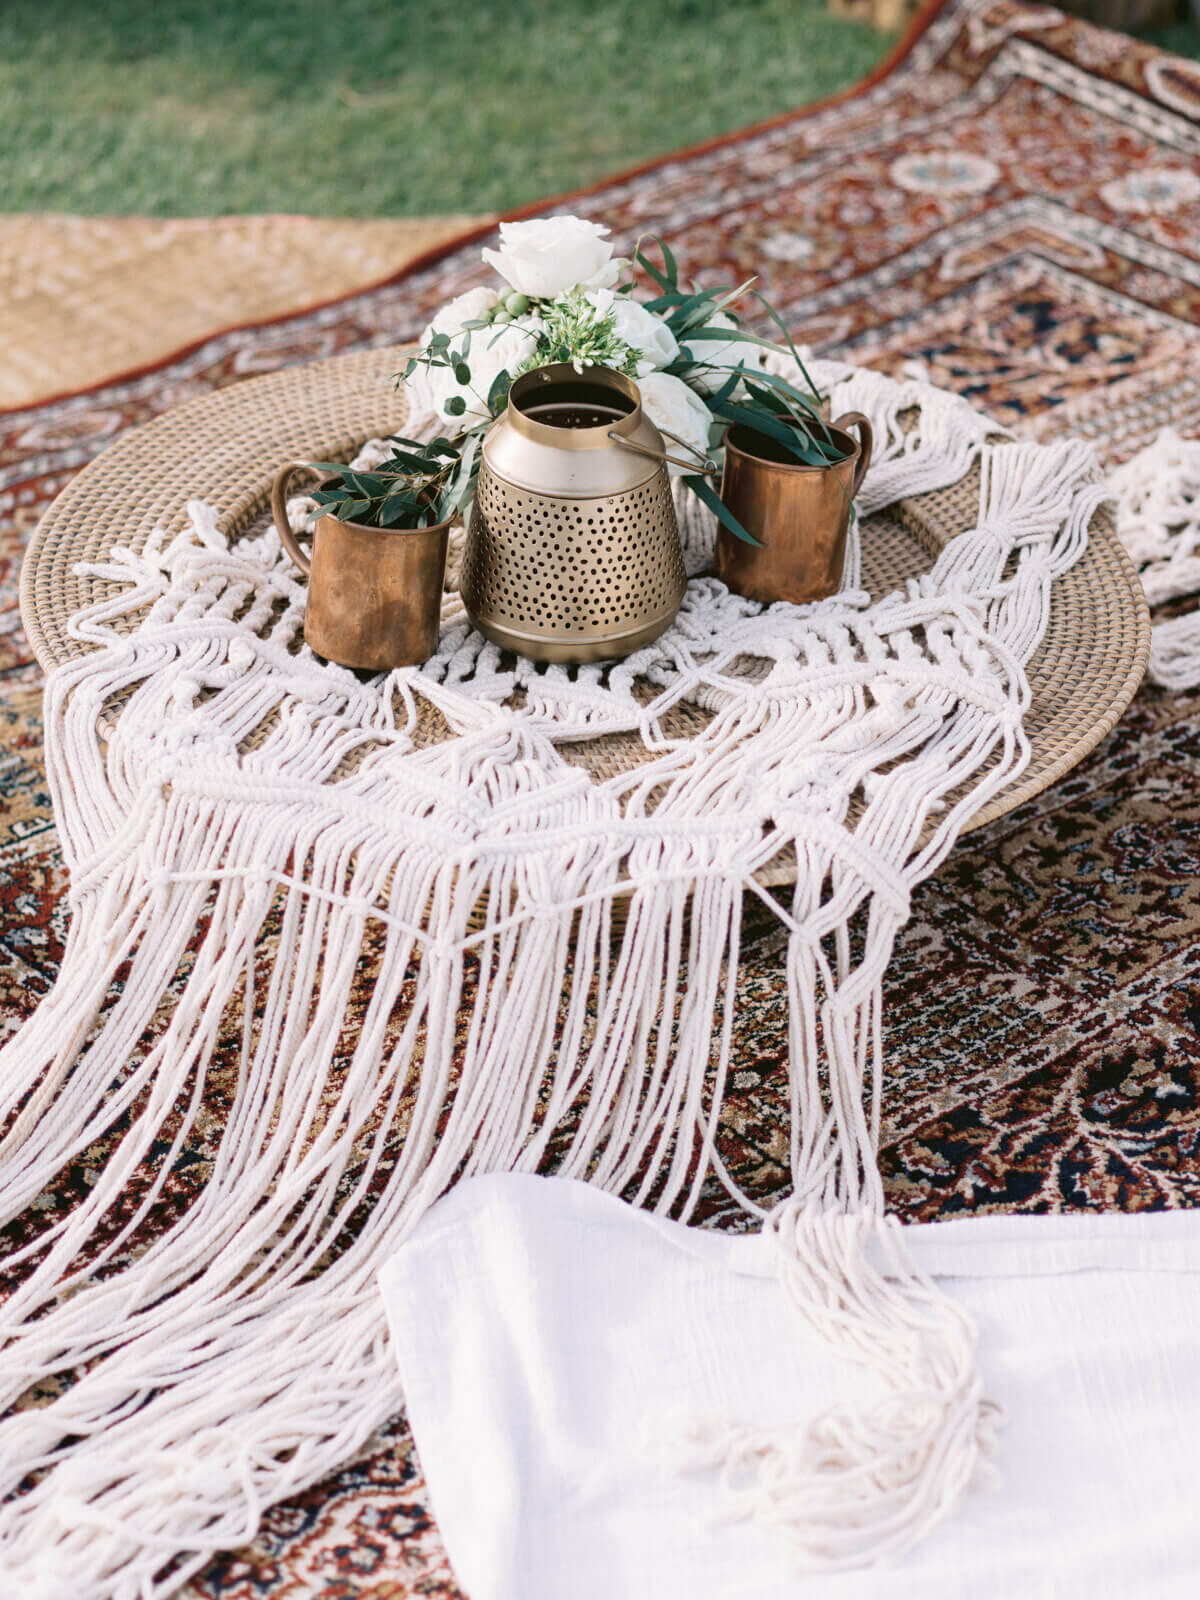 A native wood with knitted white table cloth, white flowers, and bronze cups at Khayangan Estate, Indonesia. Image by Jenny Fu Studio